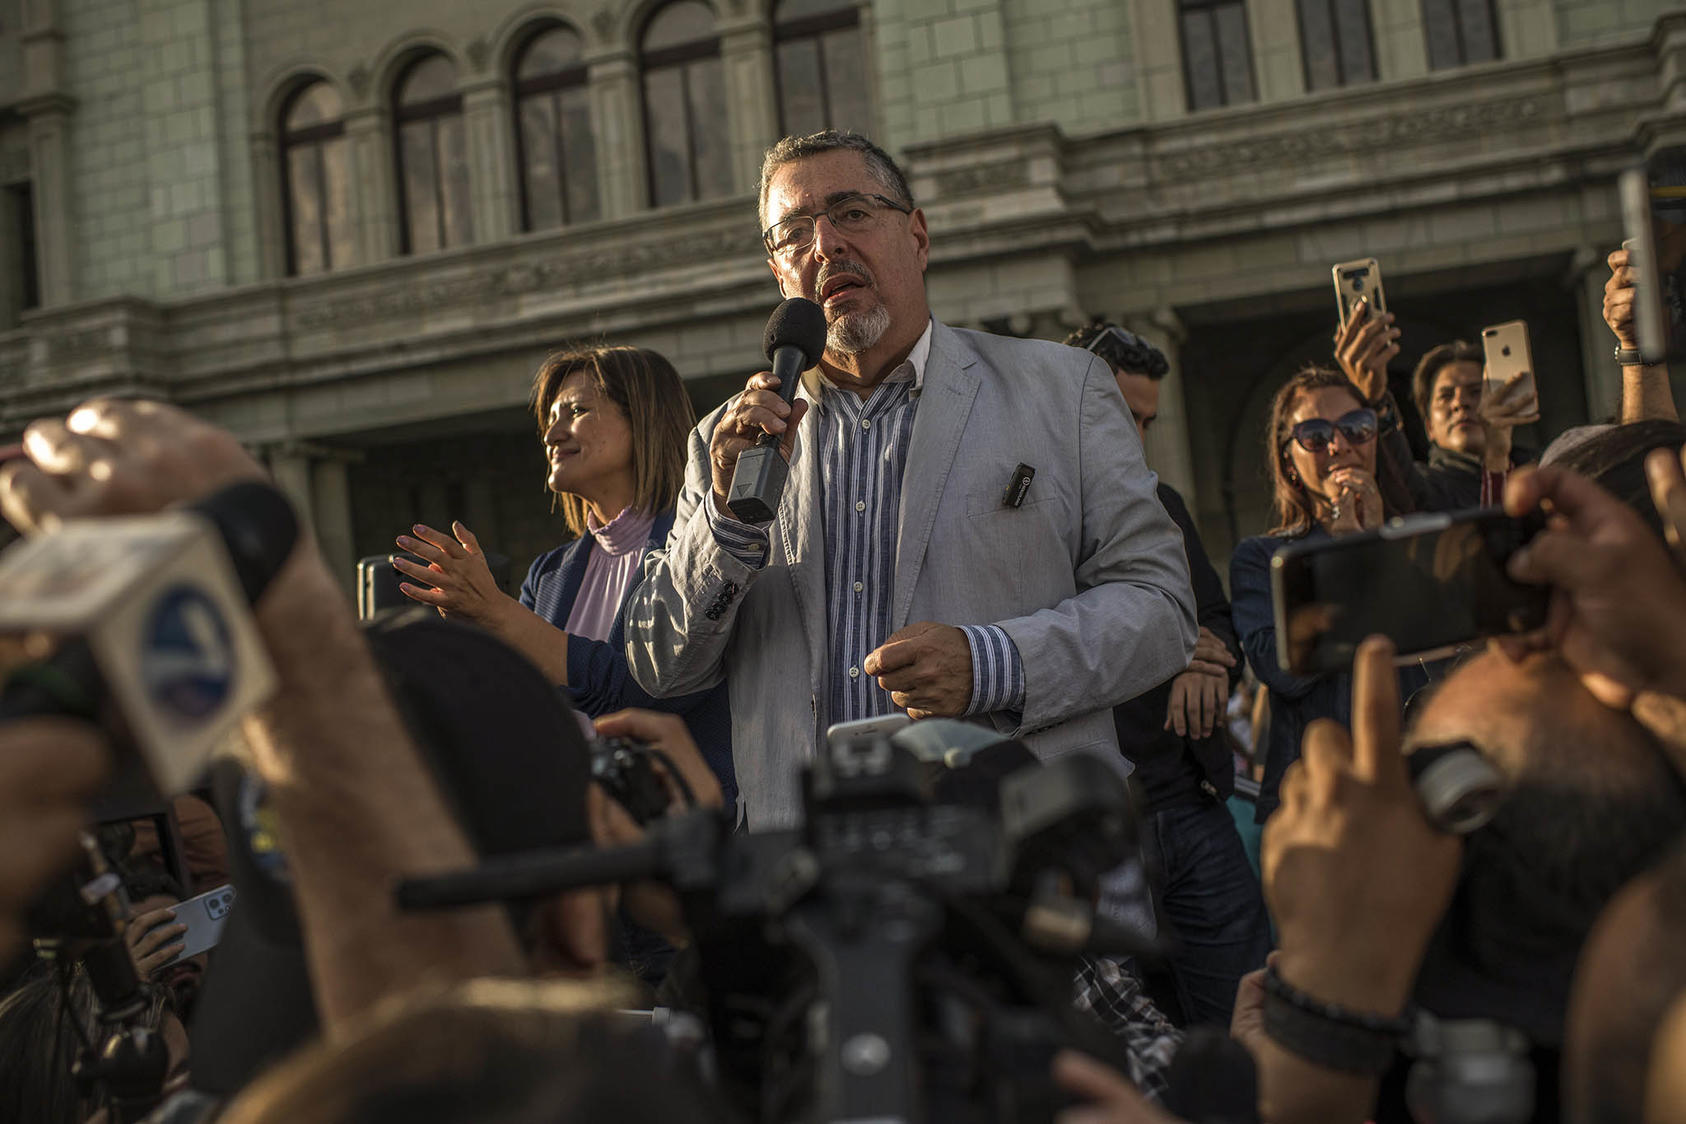 Then-candidate Bernardo Arévalo speaking during a rally in Guatemala City. July 26, 2023. (Daniele Volpe/The New York Times)